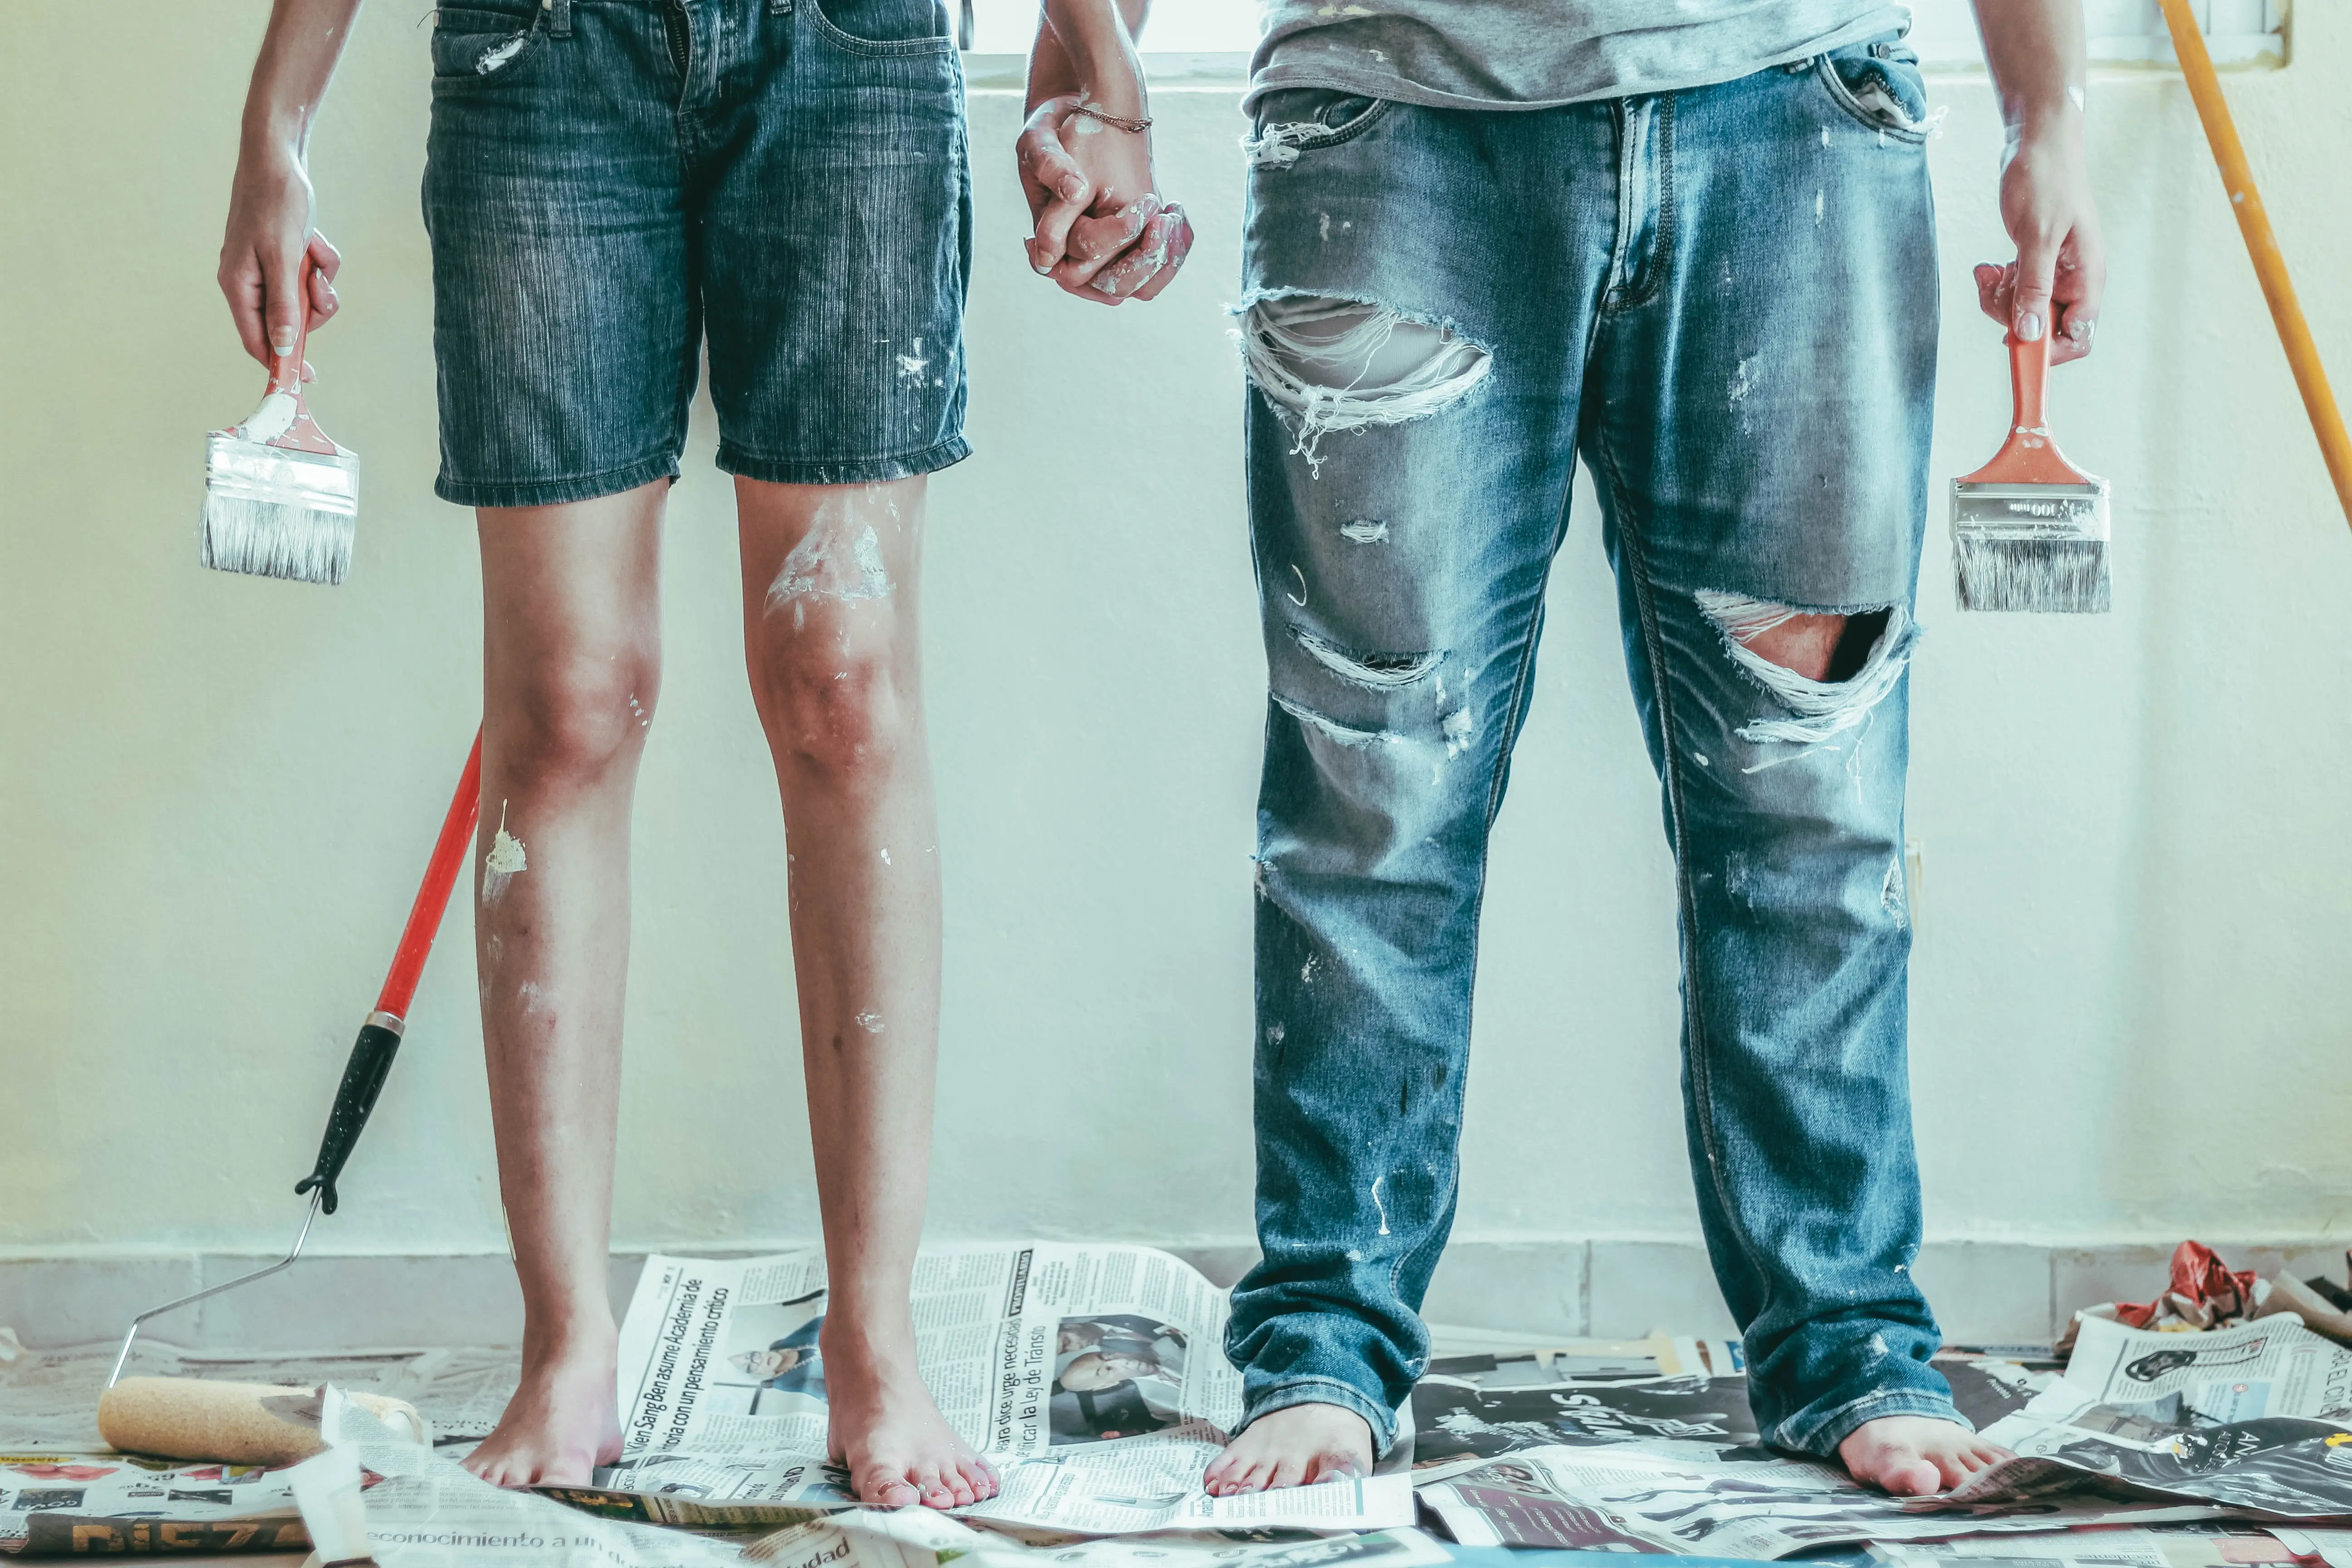 a man and a woman holding hands while holding indoor house paint brushes for painting a room. There are drips of paint all over them. The woman is wearing denim overall shorts and a white t-shirt. The man is wearing ripped blue jeans and a light grey t-shirt